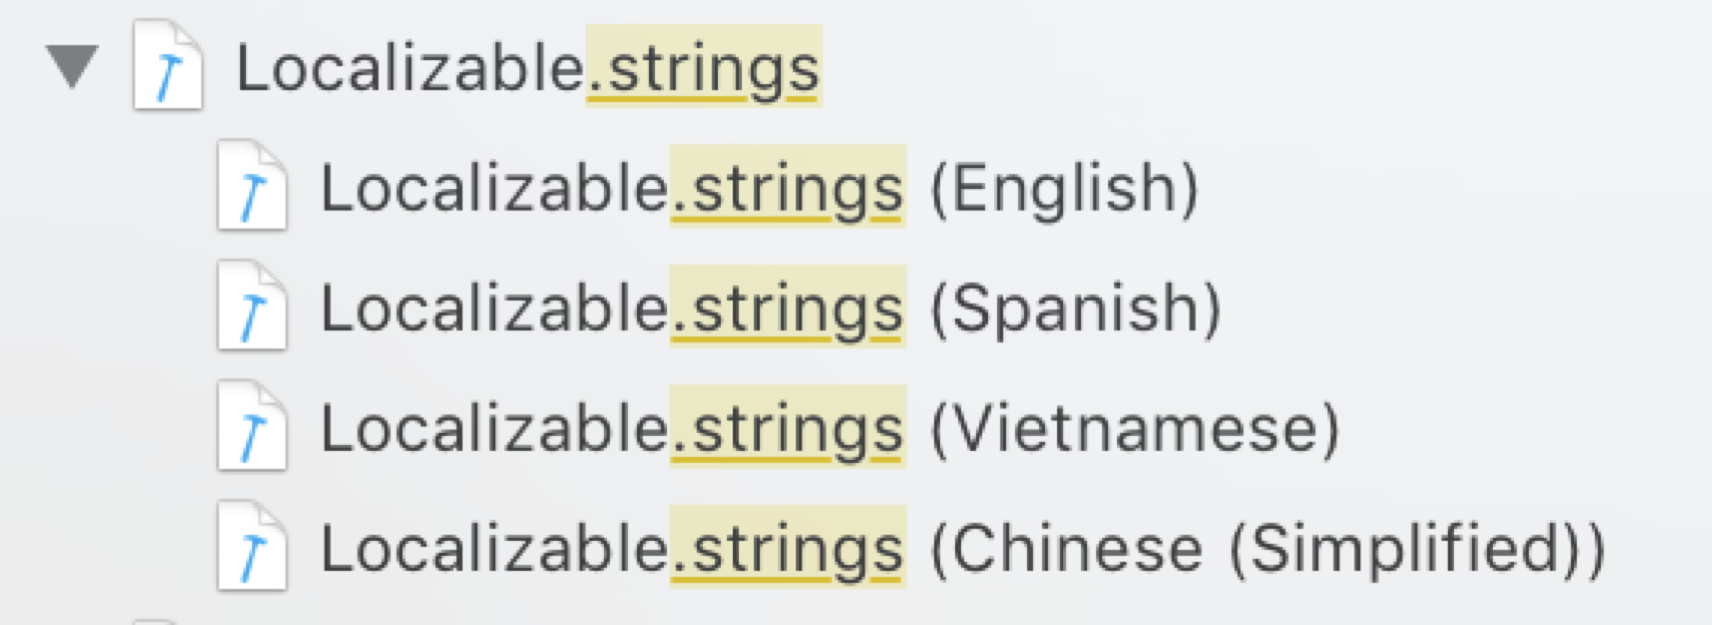 Localizable.strings example